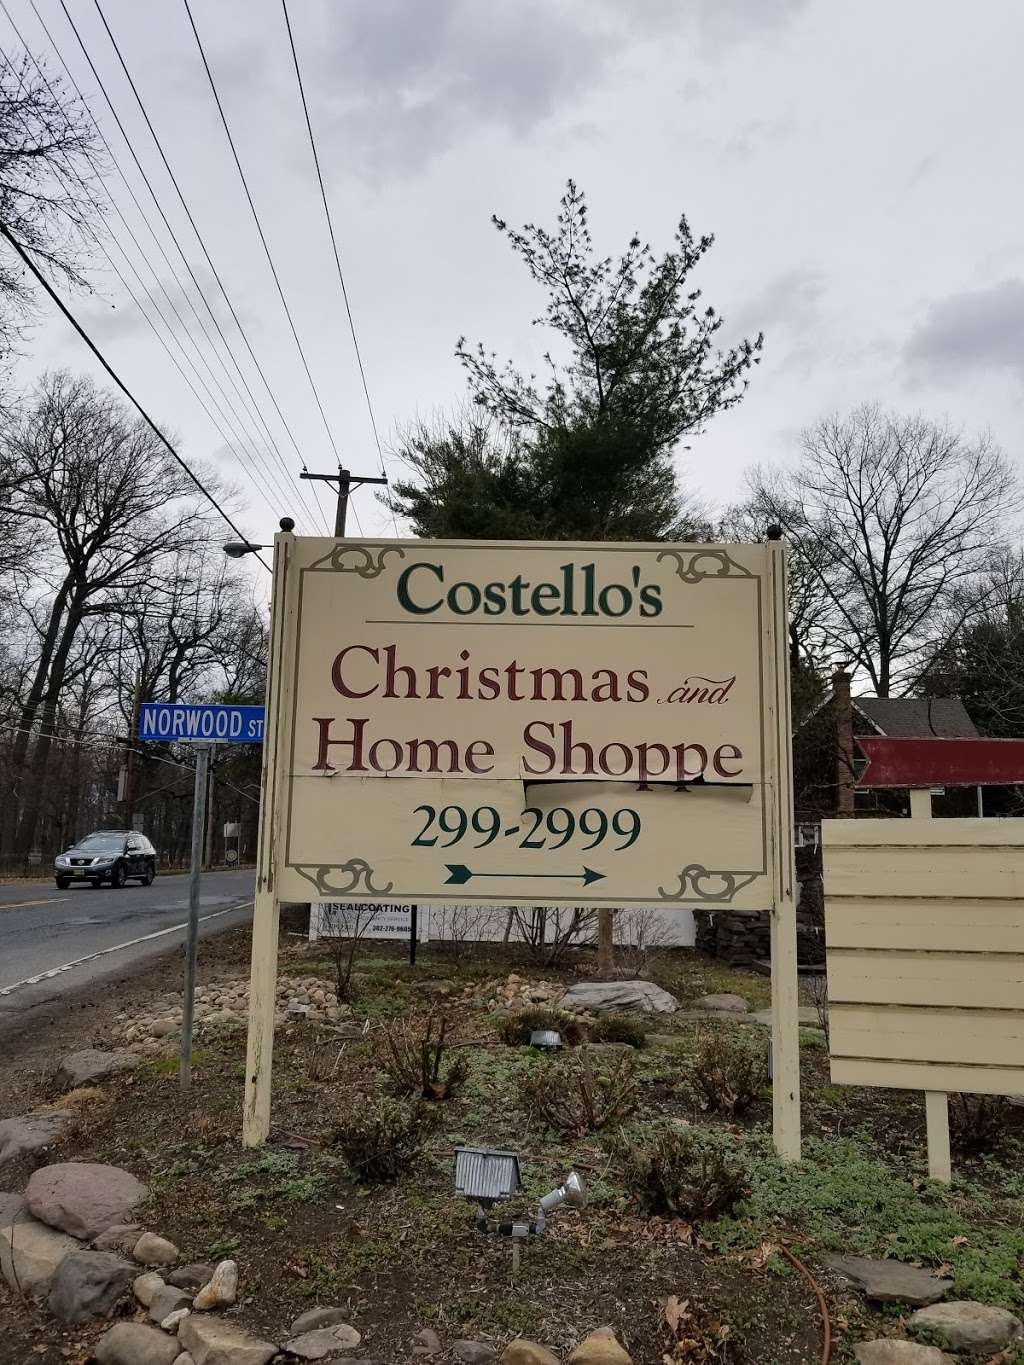 Costellos Christmas & Home - store  | Photo 7 of 7 | Address: 2 Norwood Ave, Deepwater, NJ 08023, USA | Phone: (856) 299-2999